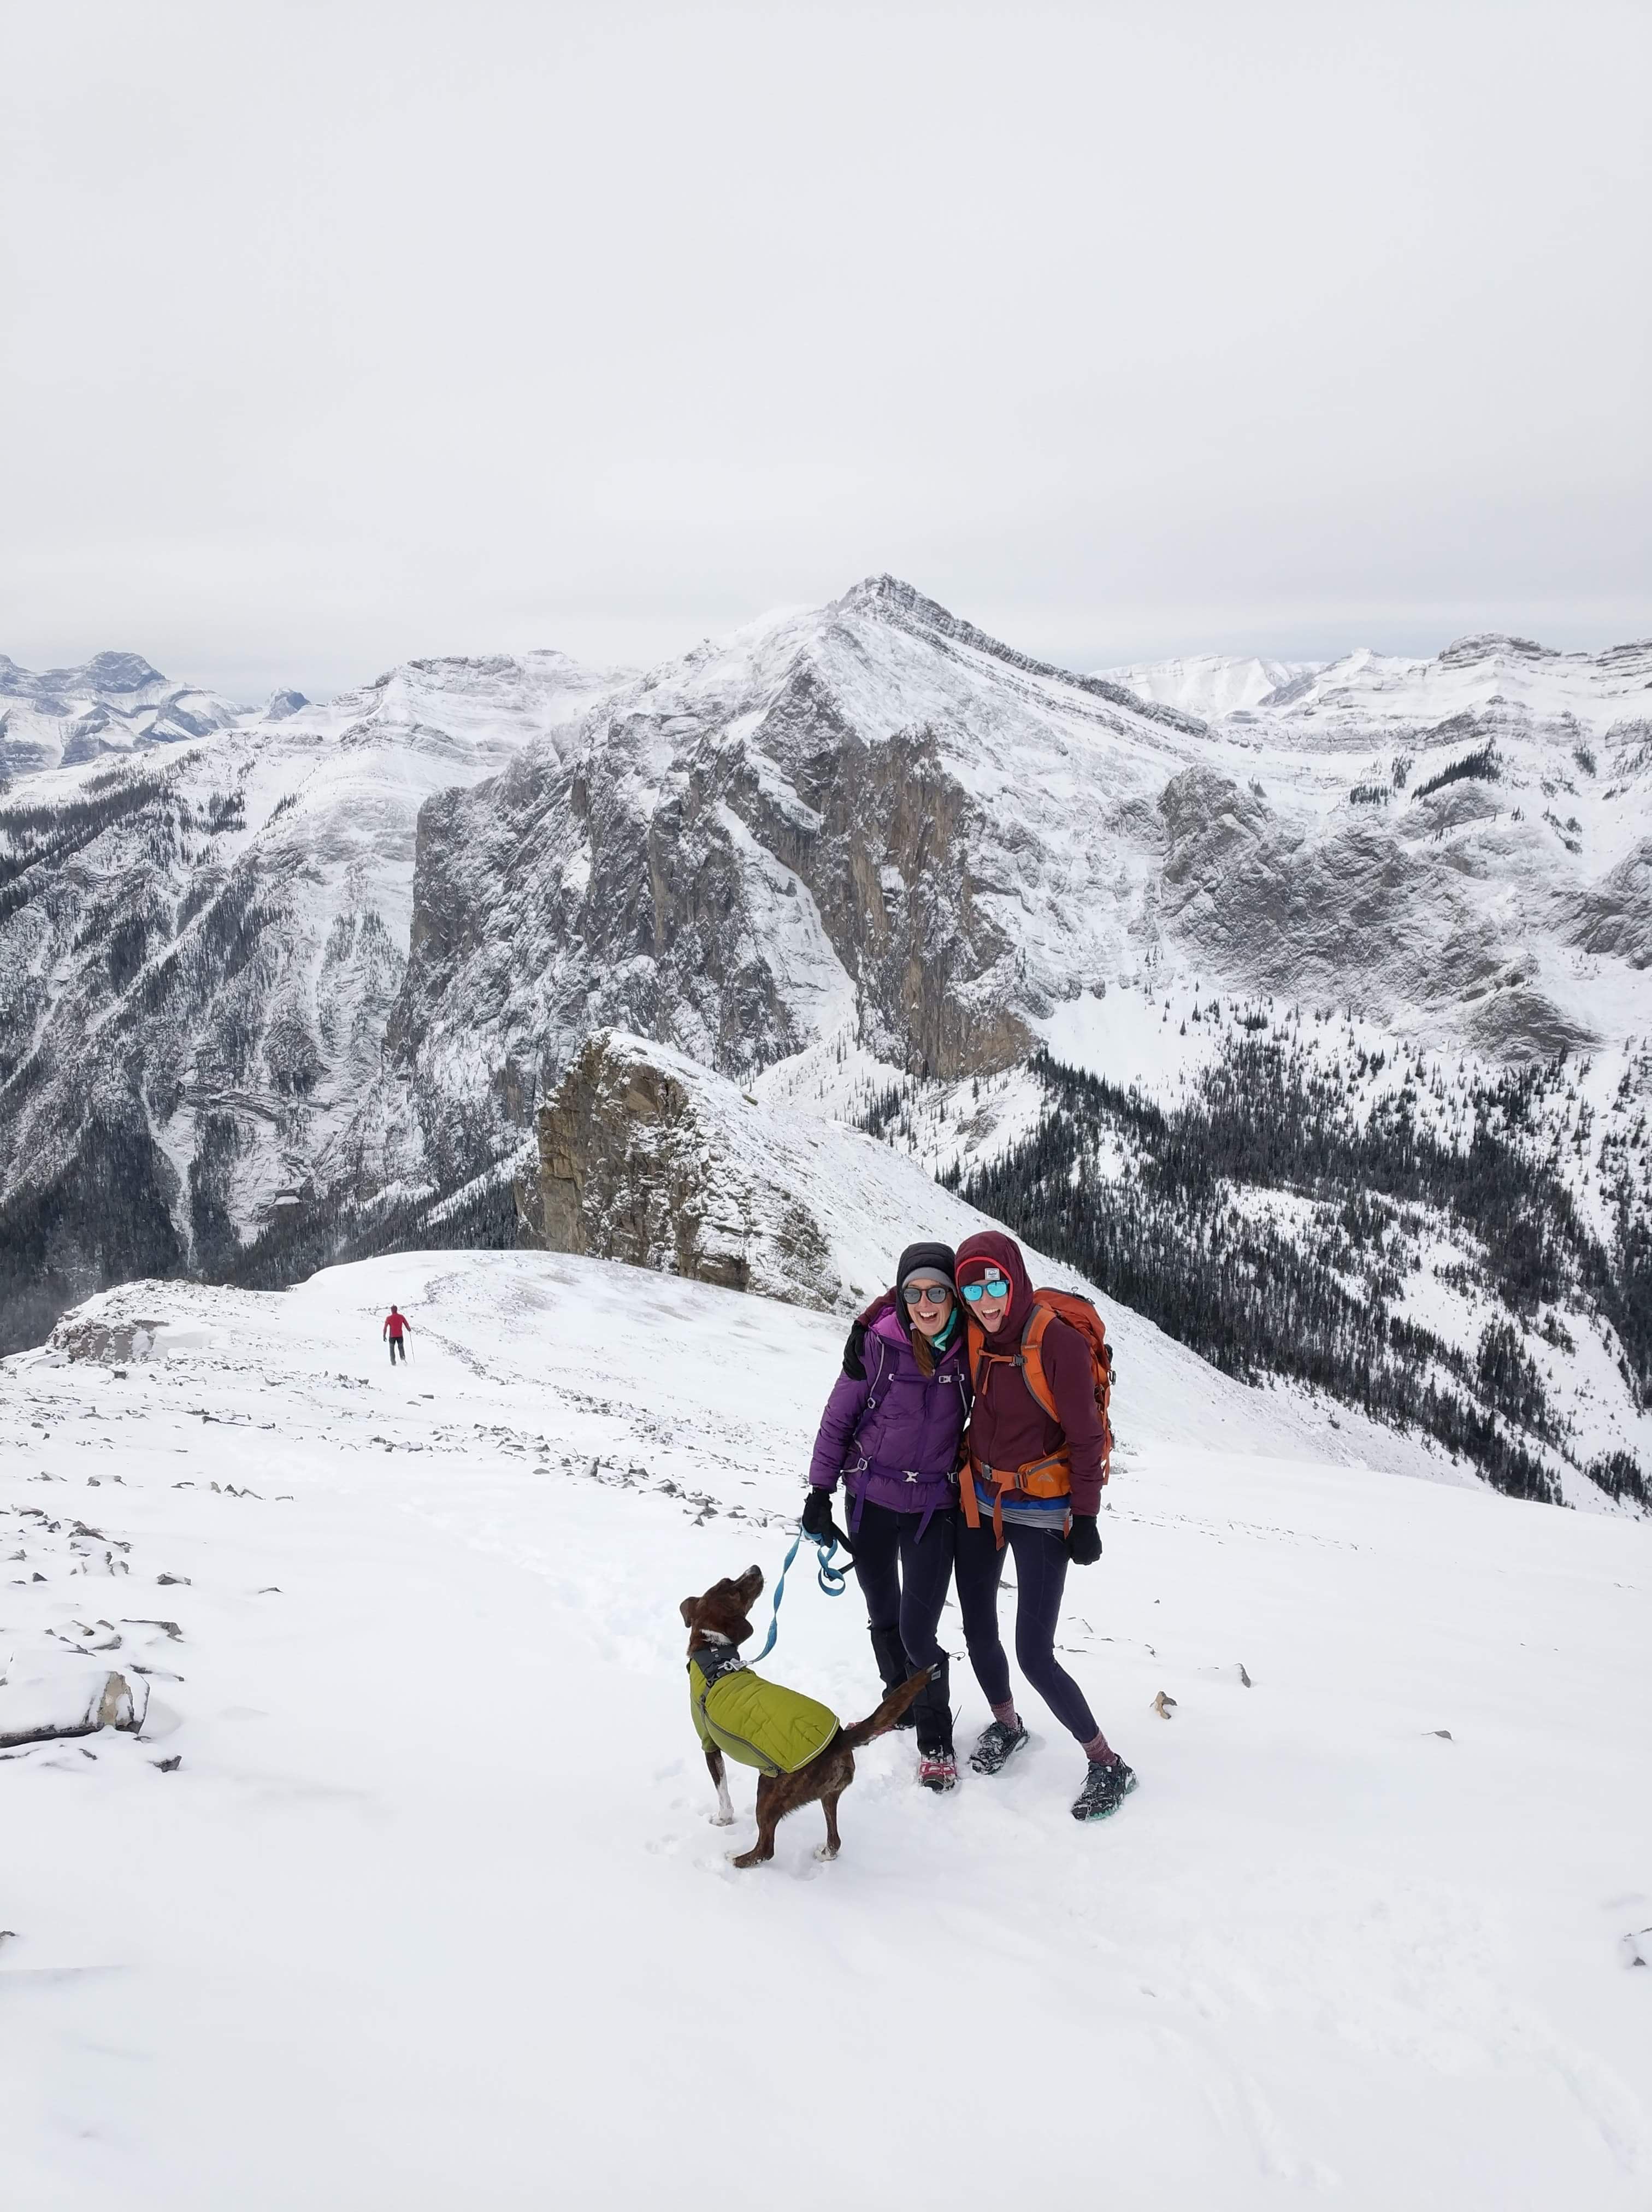 Bronwyn and friend with dog arnie in powder hound and hi & light harness in the mountains.